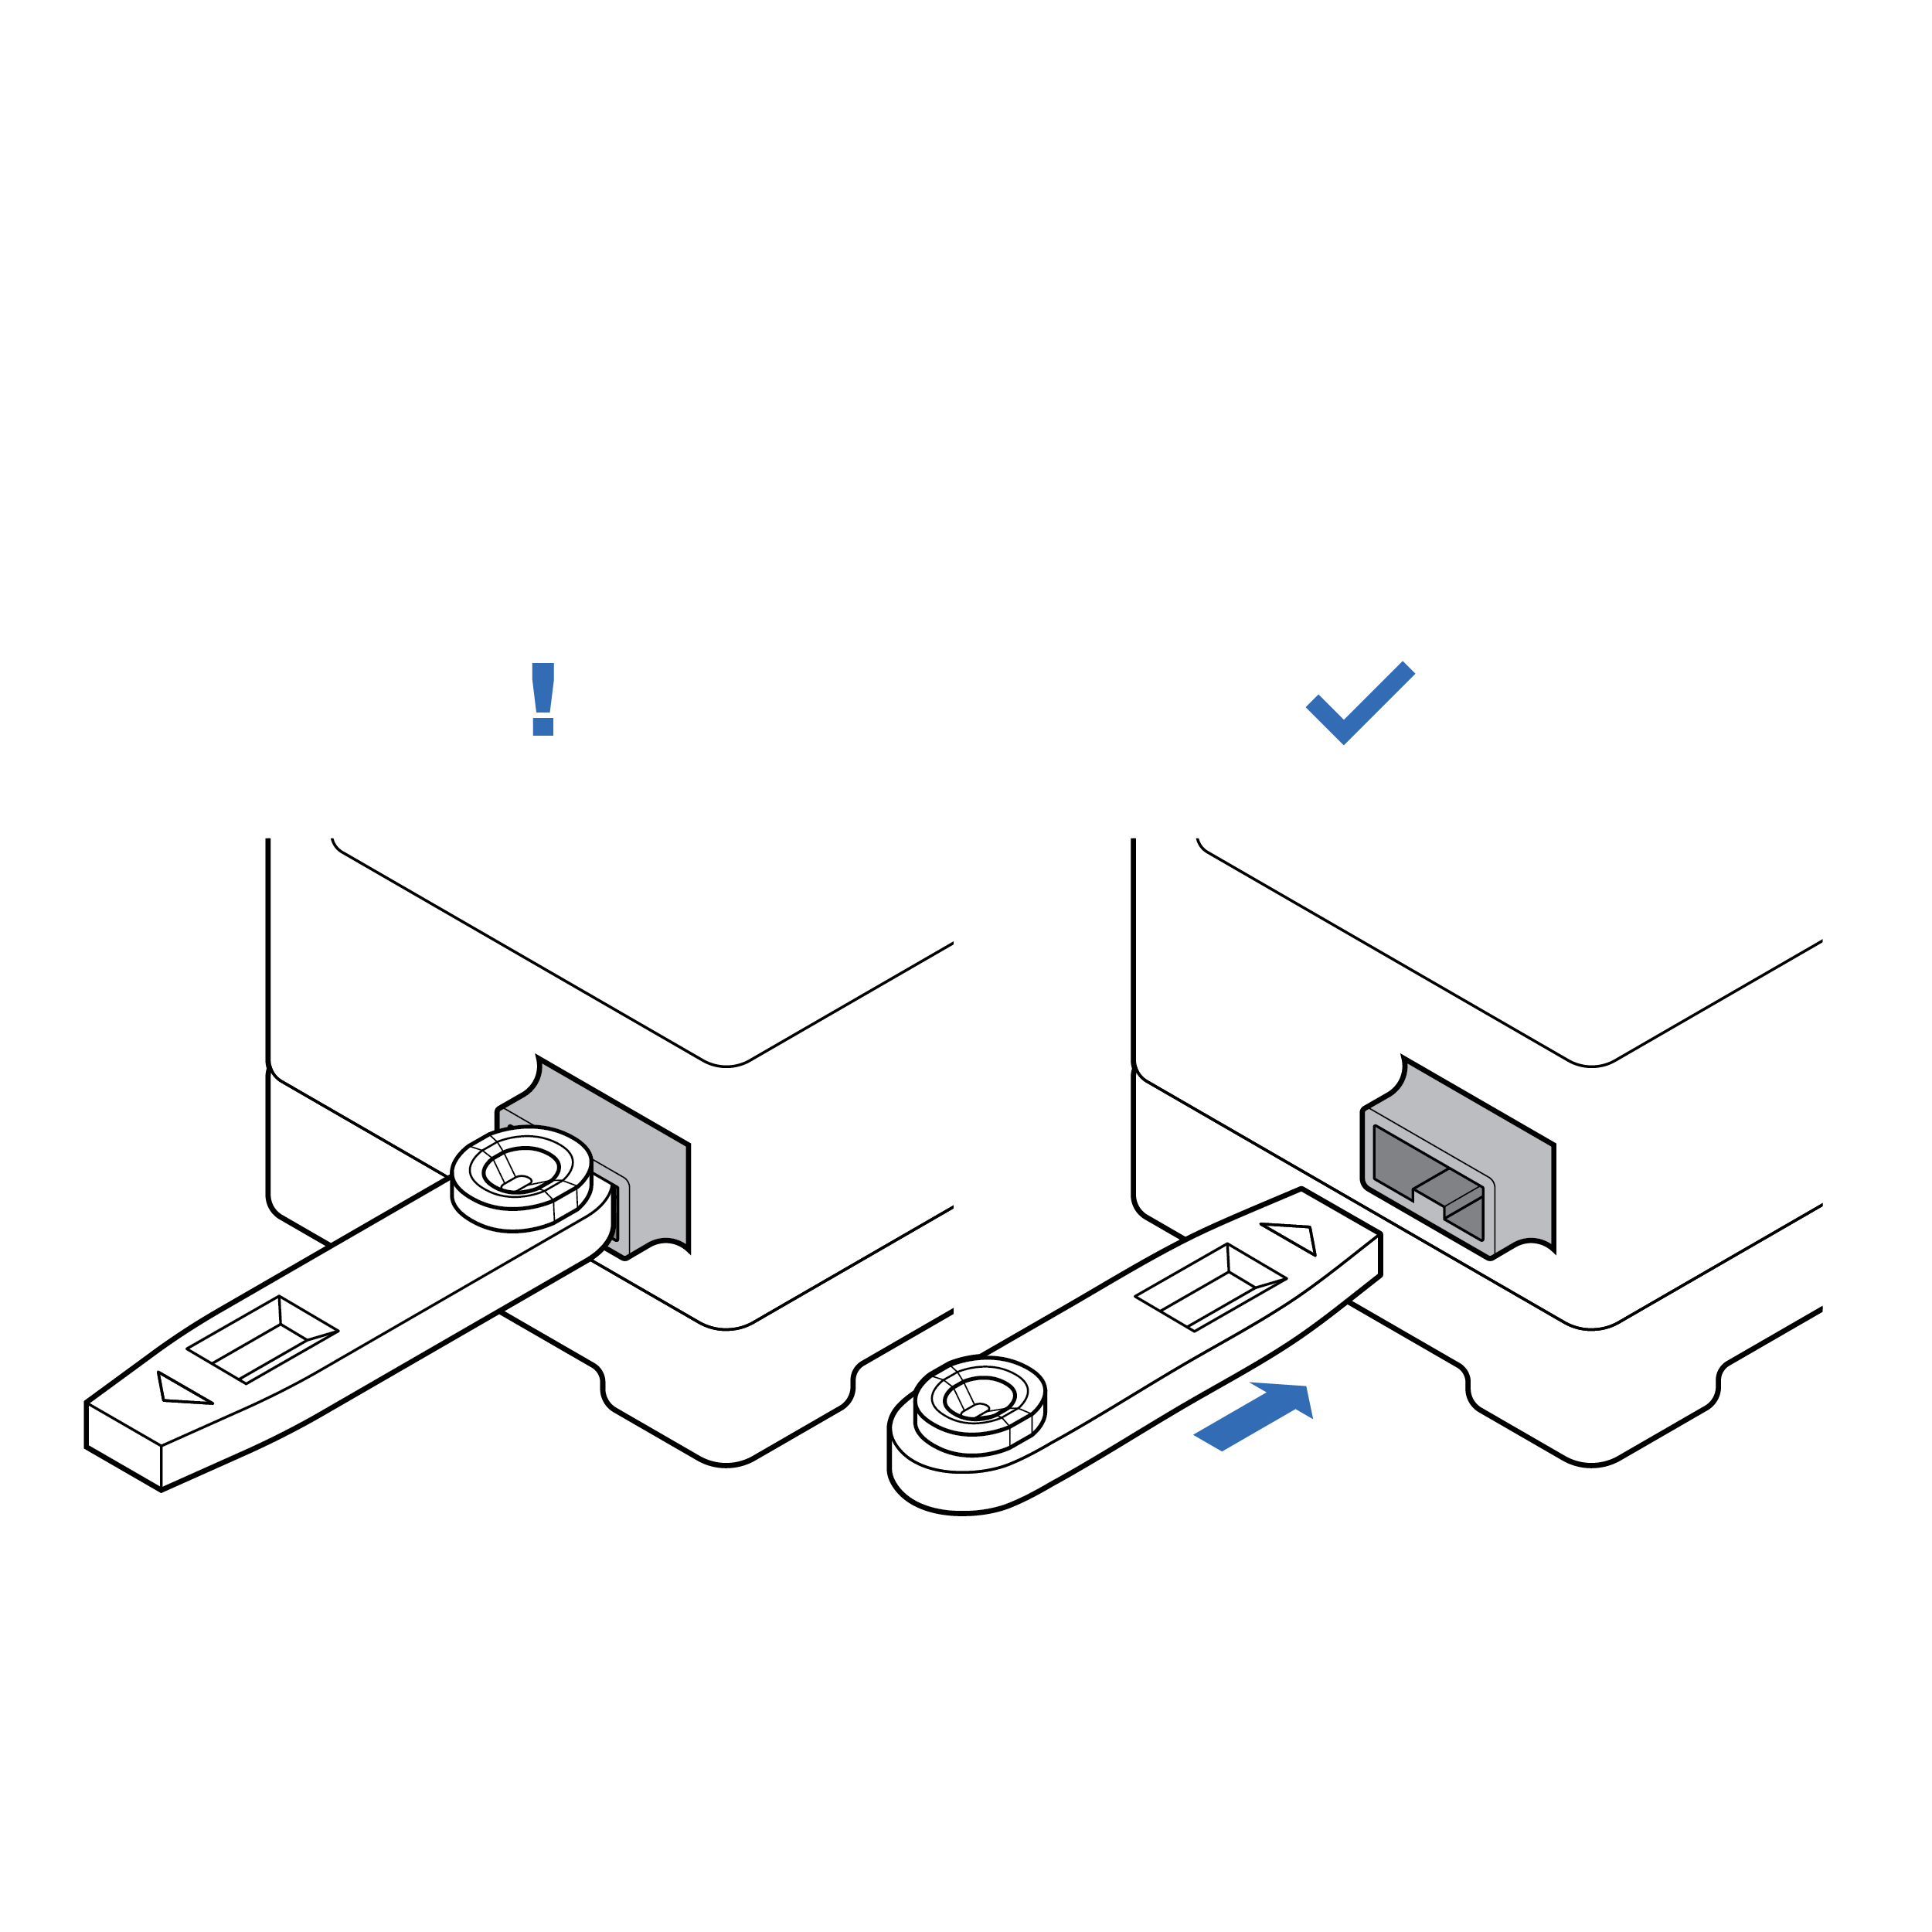 On the left, an incorrectly oriented cassette is blocked from being inserted into a test reader. A raised feature on the cassette prevents it from entering the mating feature on the test reader. A blue exclamation point above the test reader indicates that the user receives sufficient feedback for cassette insertion. On the right, a correctly oriented cassette is inserted into a test reader. A raised track in the test reader mates with a corresponding slot feature of the cassette. A blue check mark above the test reader indicates that the user receives sufficient feedback for cassette insertion.